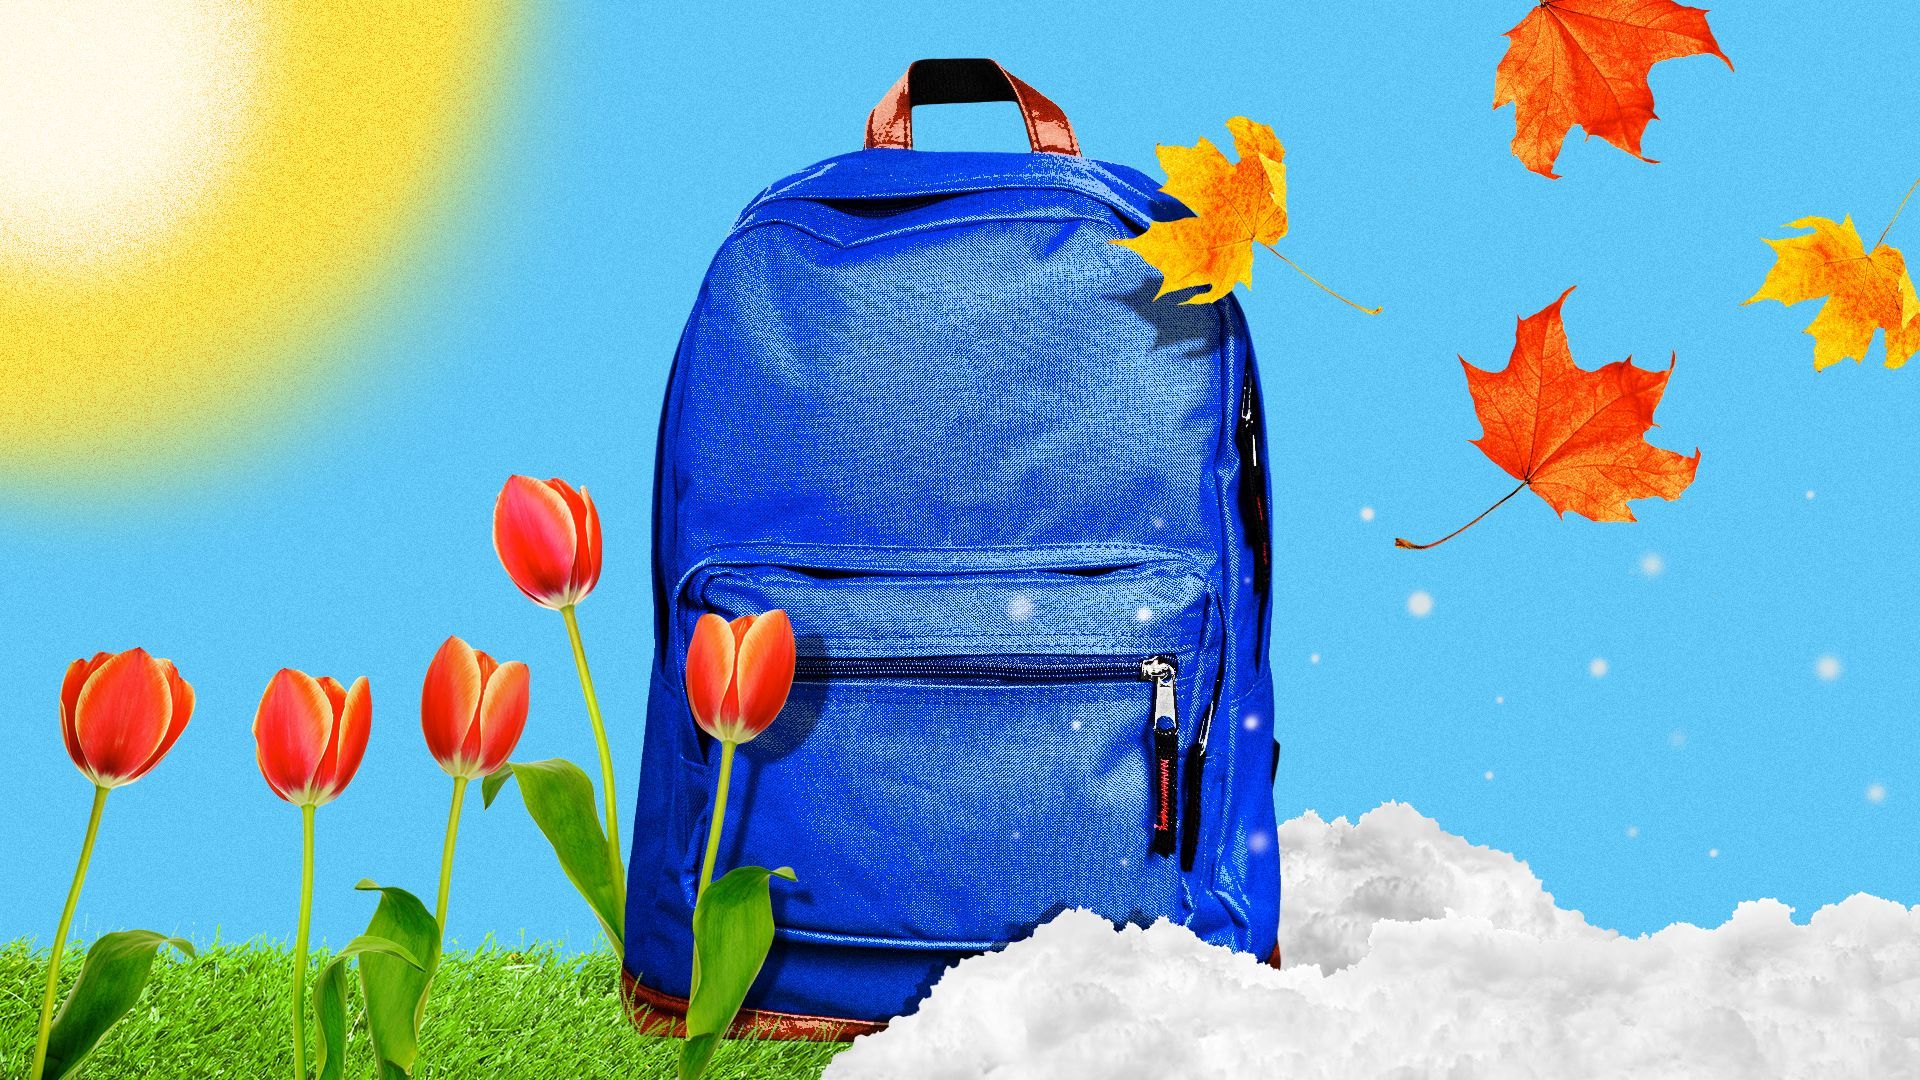 Illustration of a backpack surrounded by elements of all four seasons.